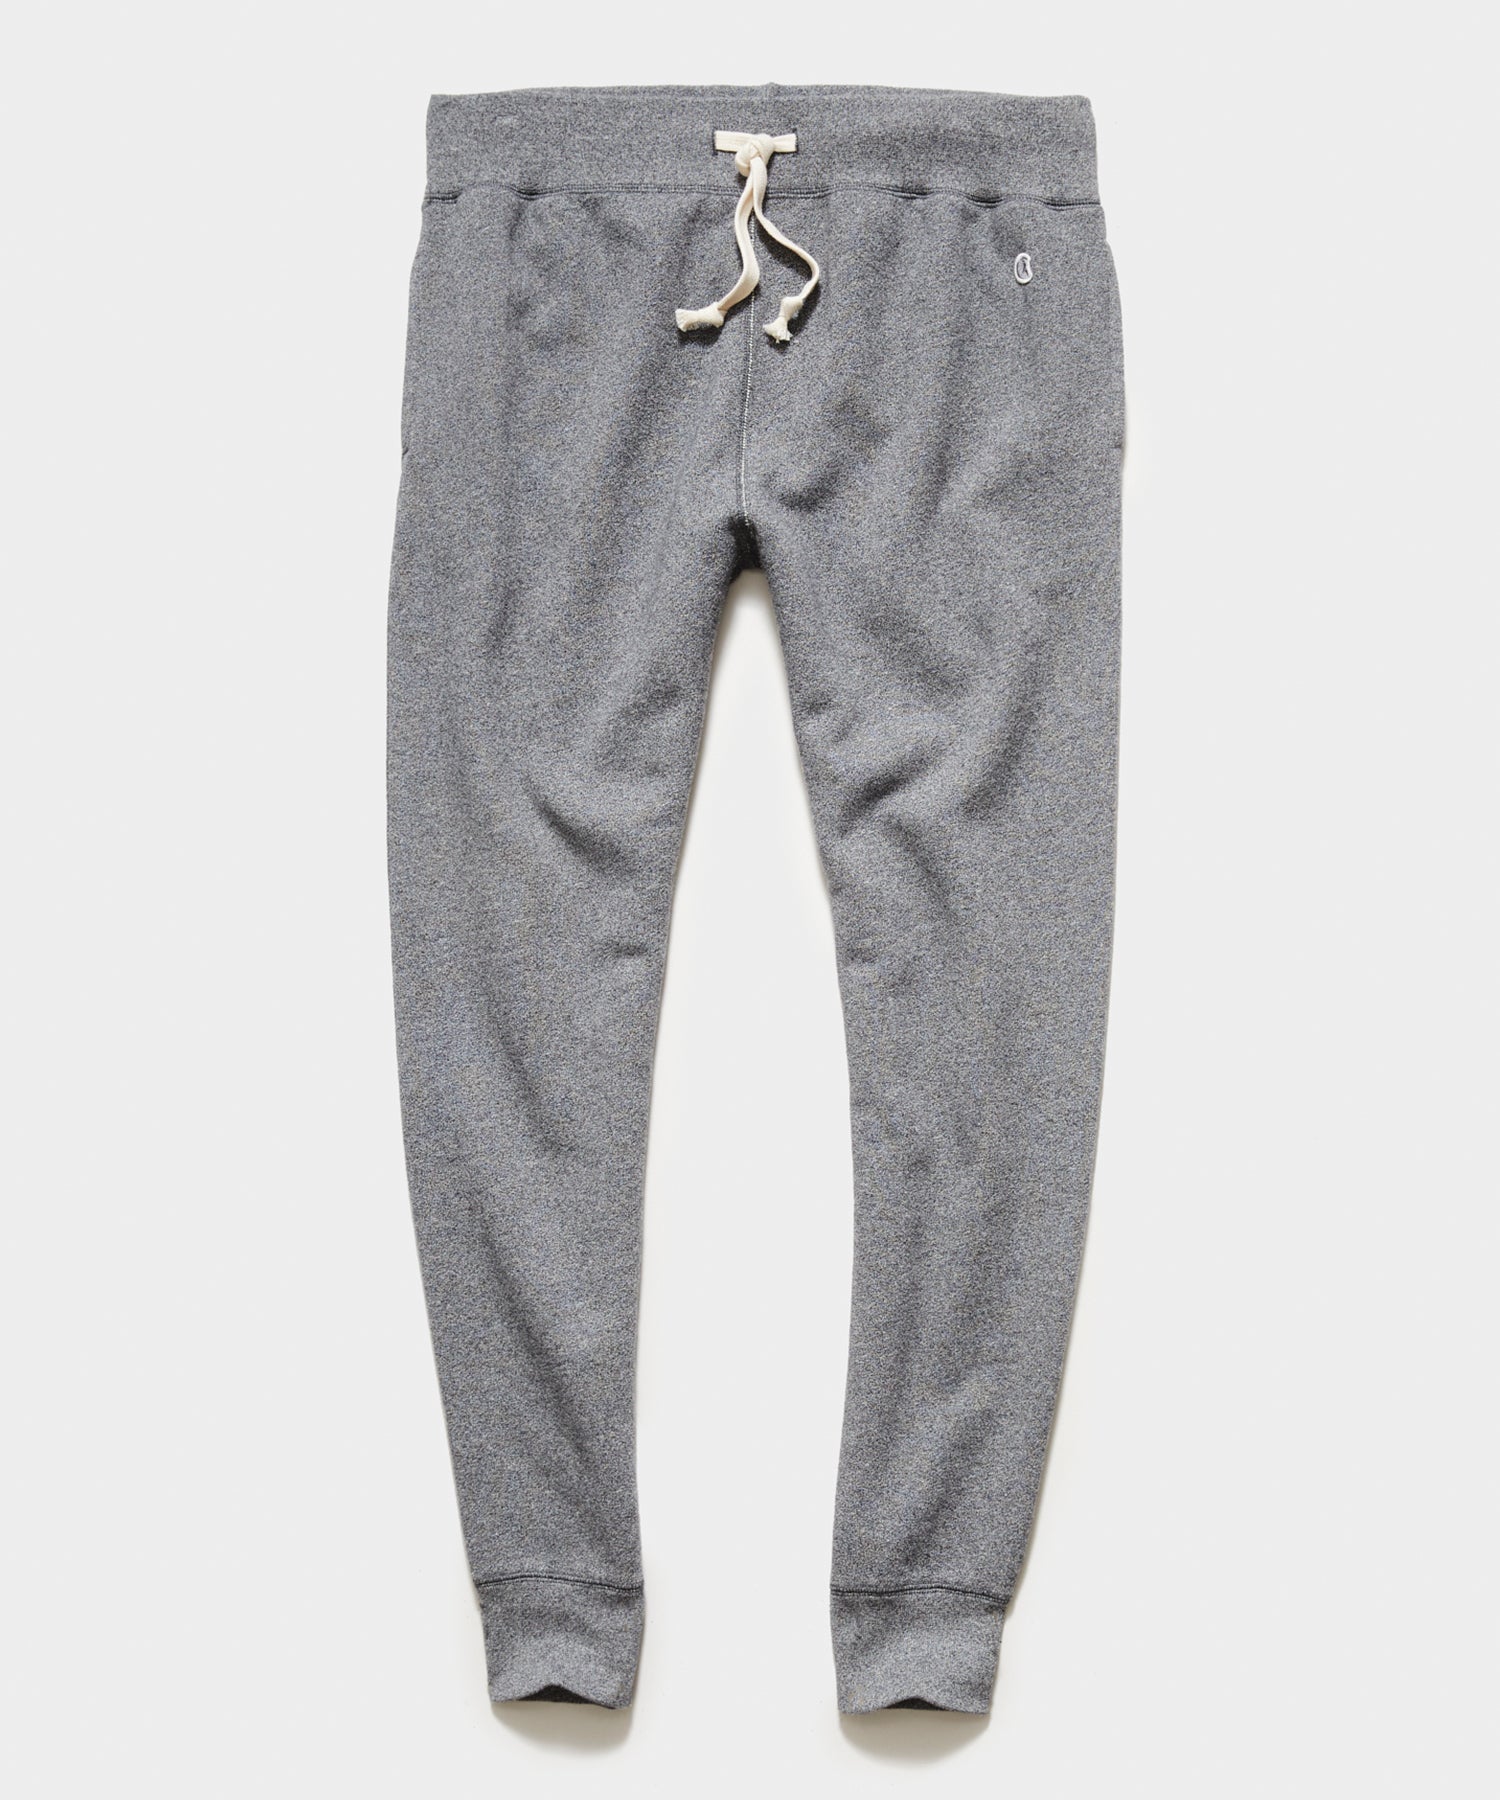 Midweight Slim Jogger Sweatpant in Salt and Pepper